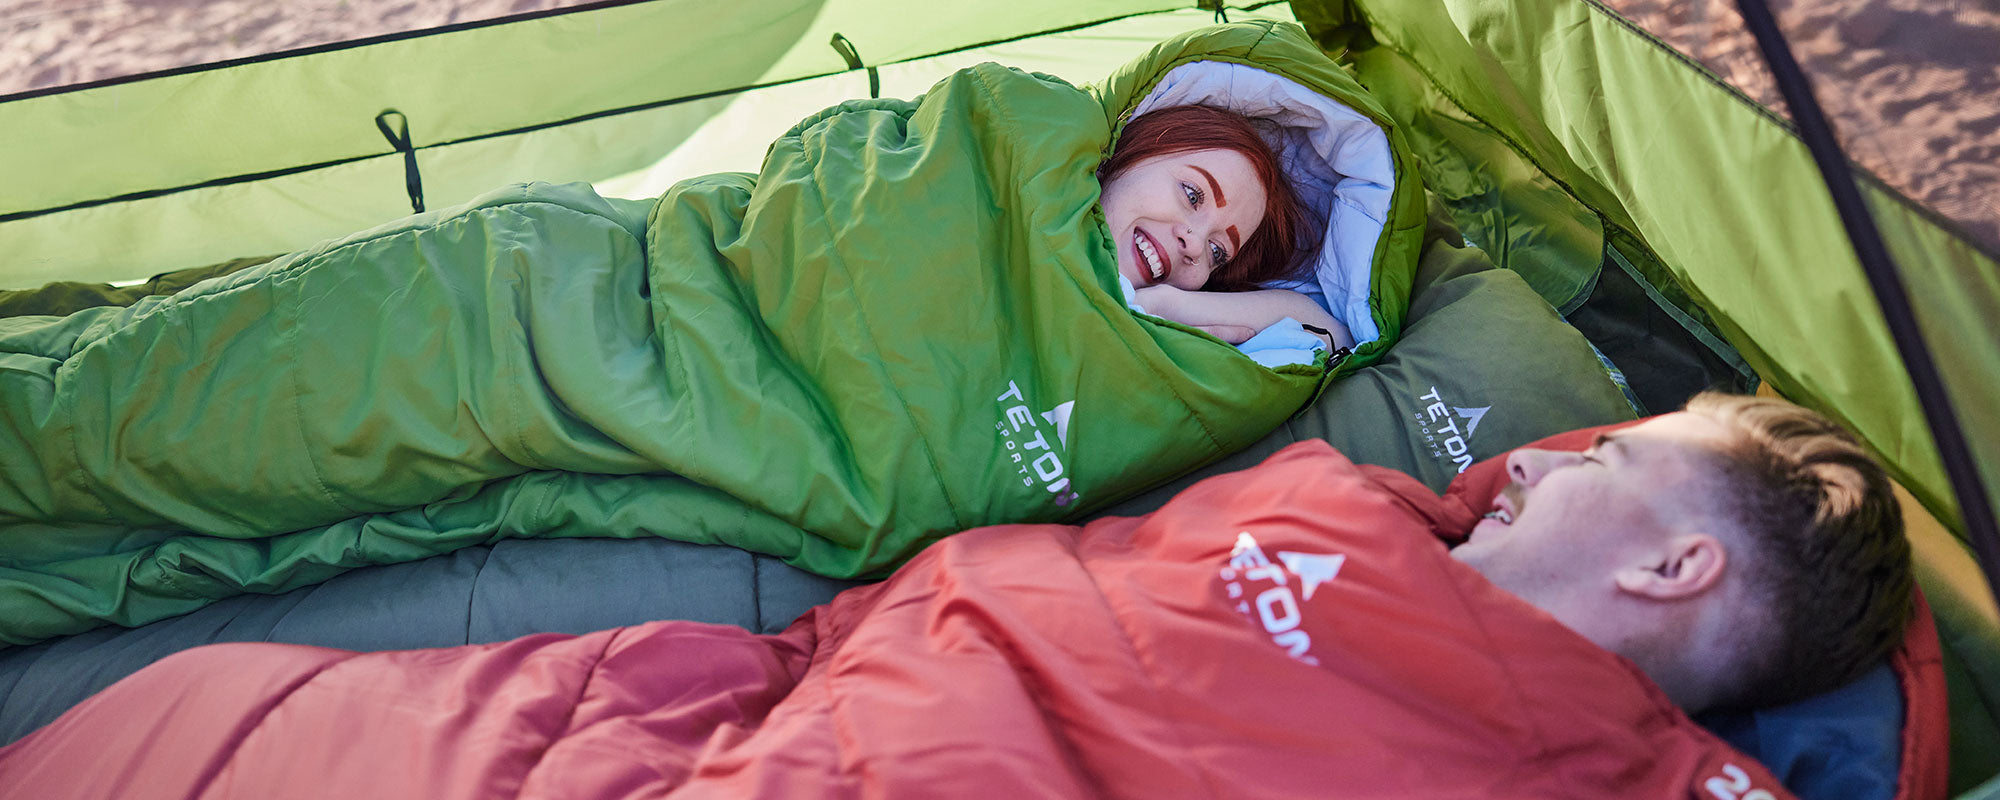 A man and woman in their leef sleeping bags.